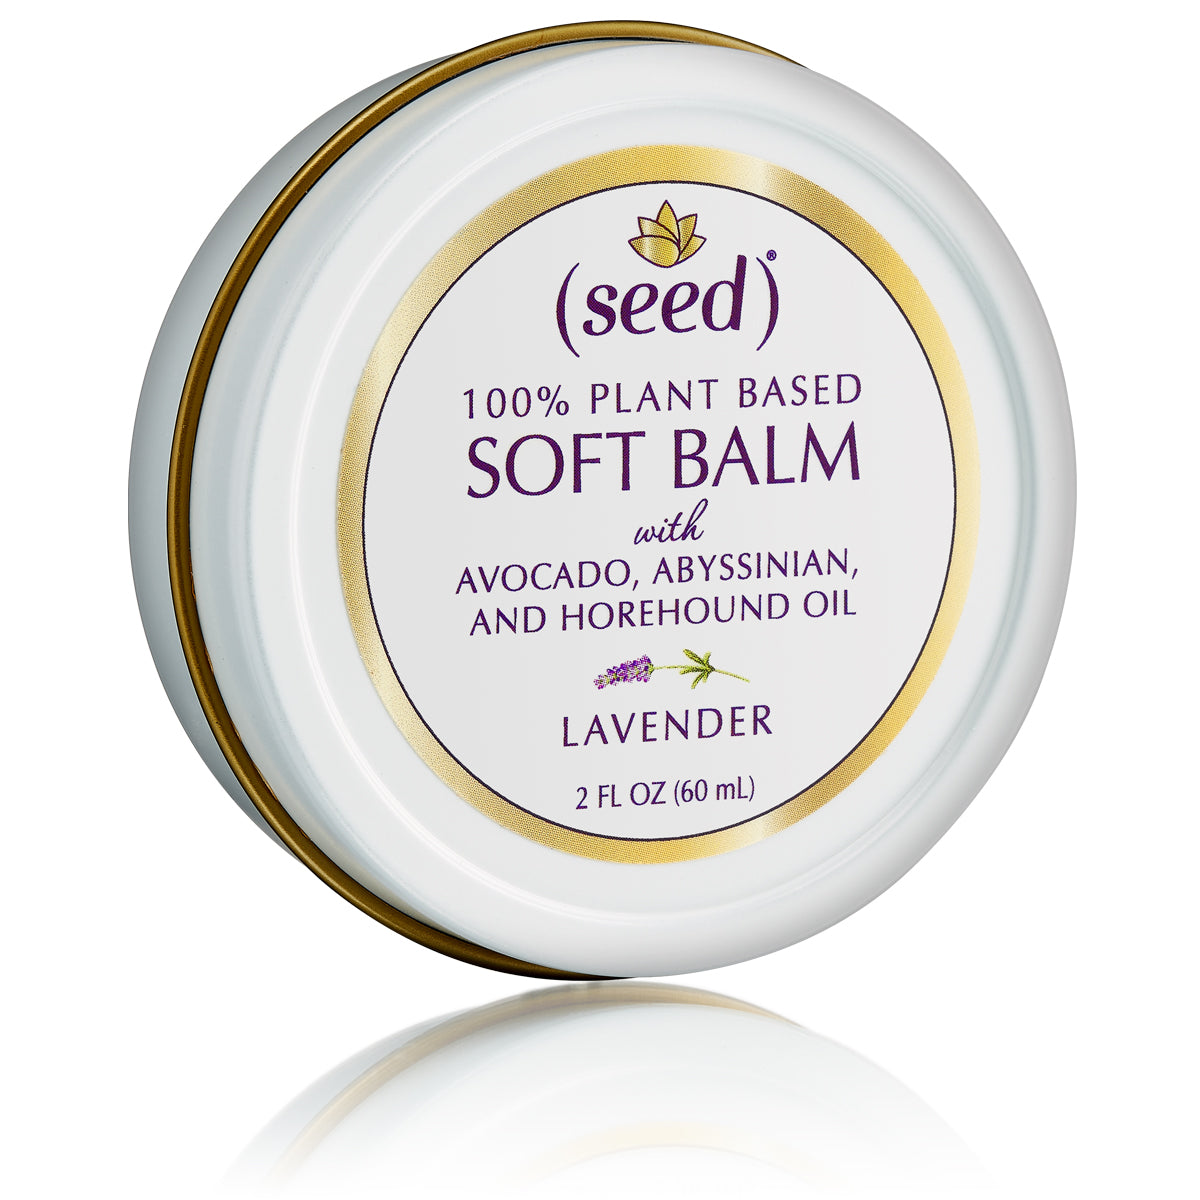 Seed Lavender Soft Balm for very dry skin and lips with lavender essential oil in 2 oz tin